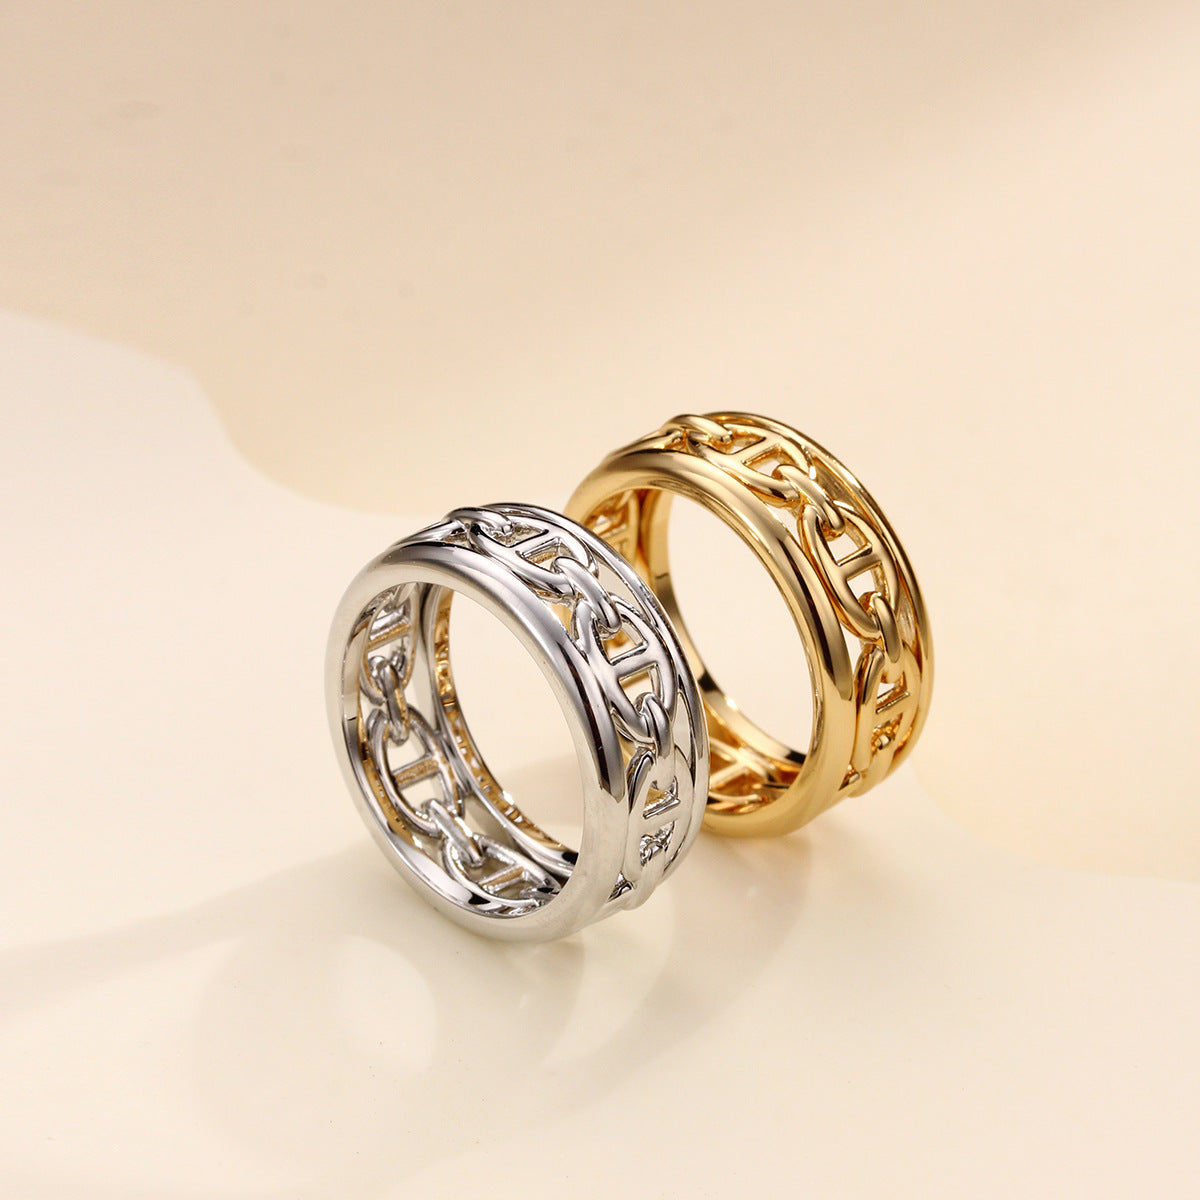 Genuine 18K gold/platinum plated Scarf rings